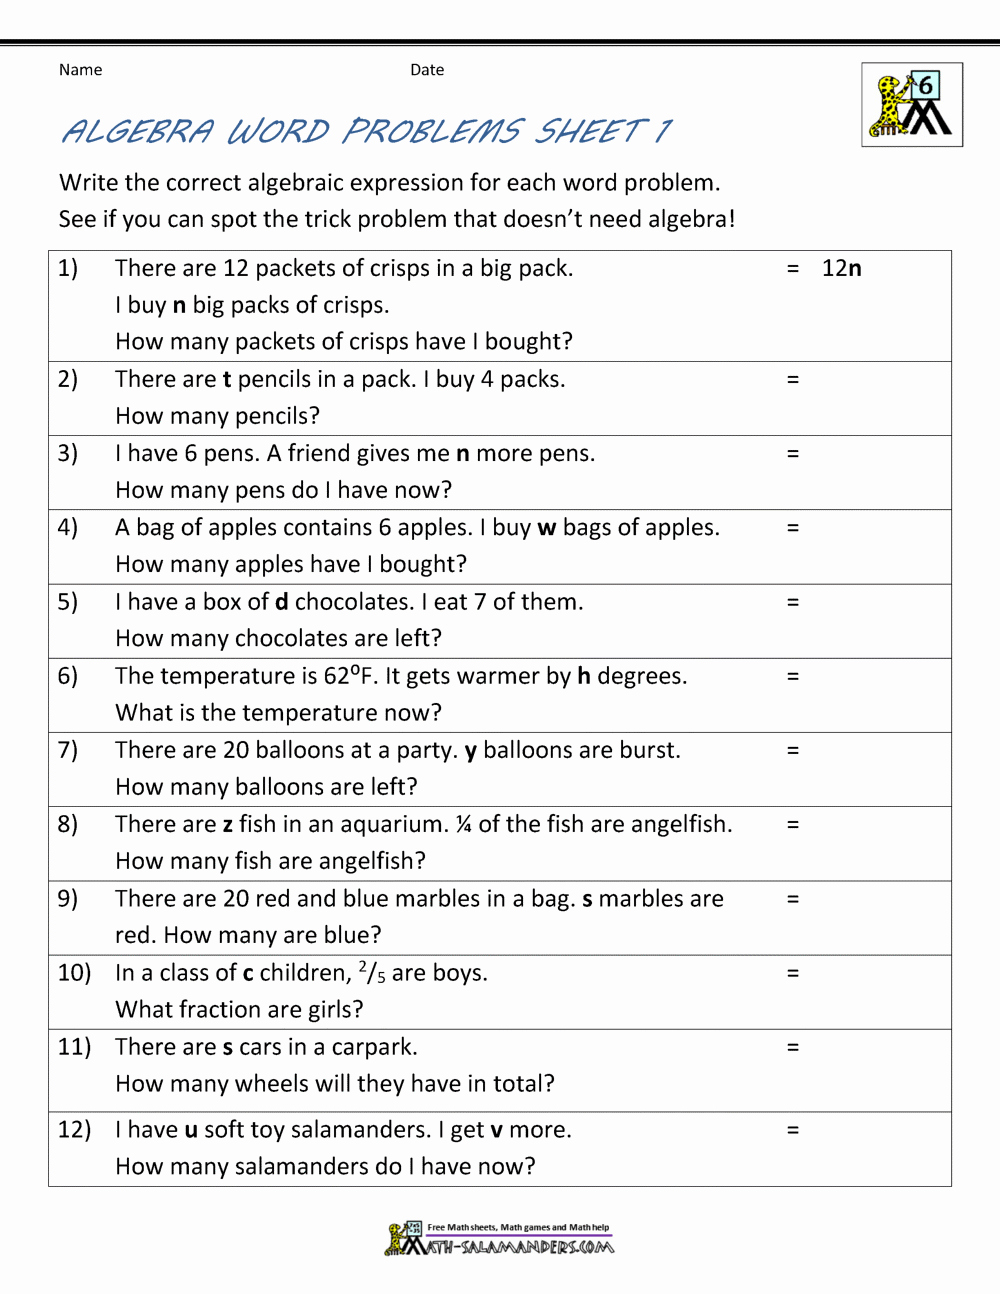 Age Word Problems Worksheet Unique Homework Worksheet Reflexive Verbs and Daily Routine